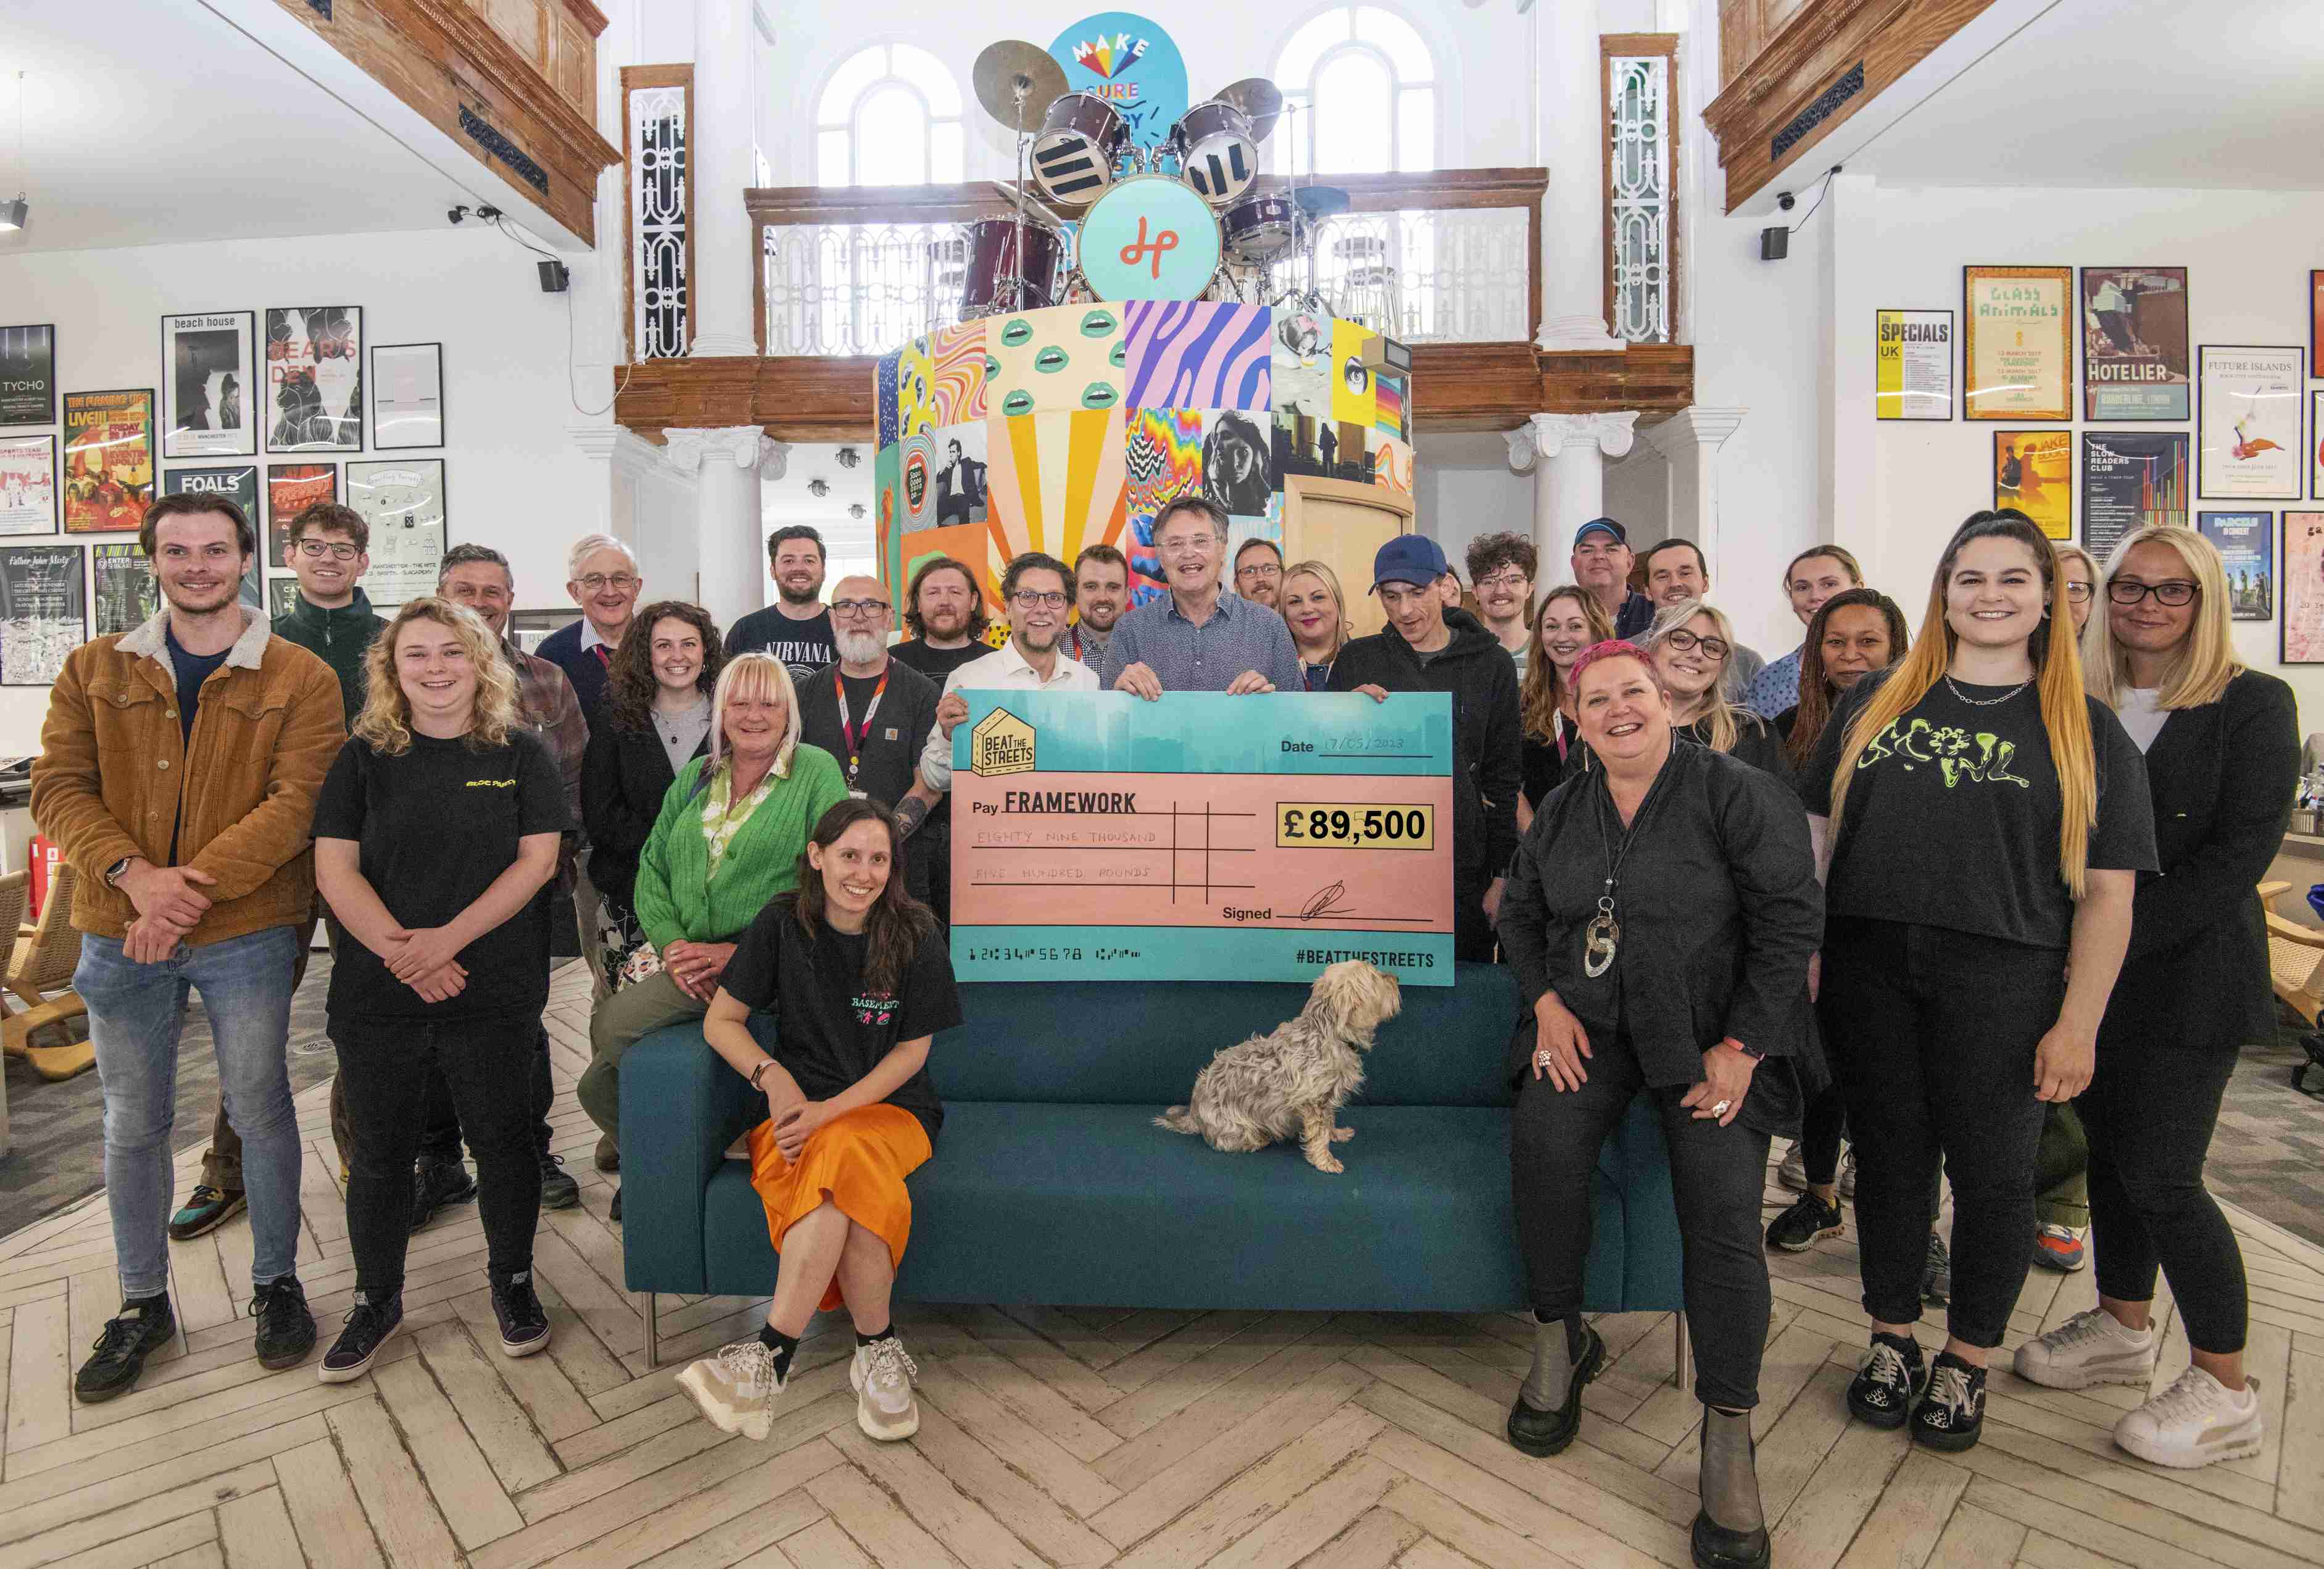 DHP Family & Framework With £89,500 Raised From Beat The Streets